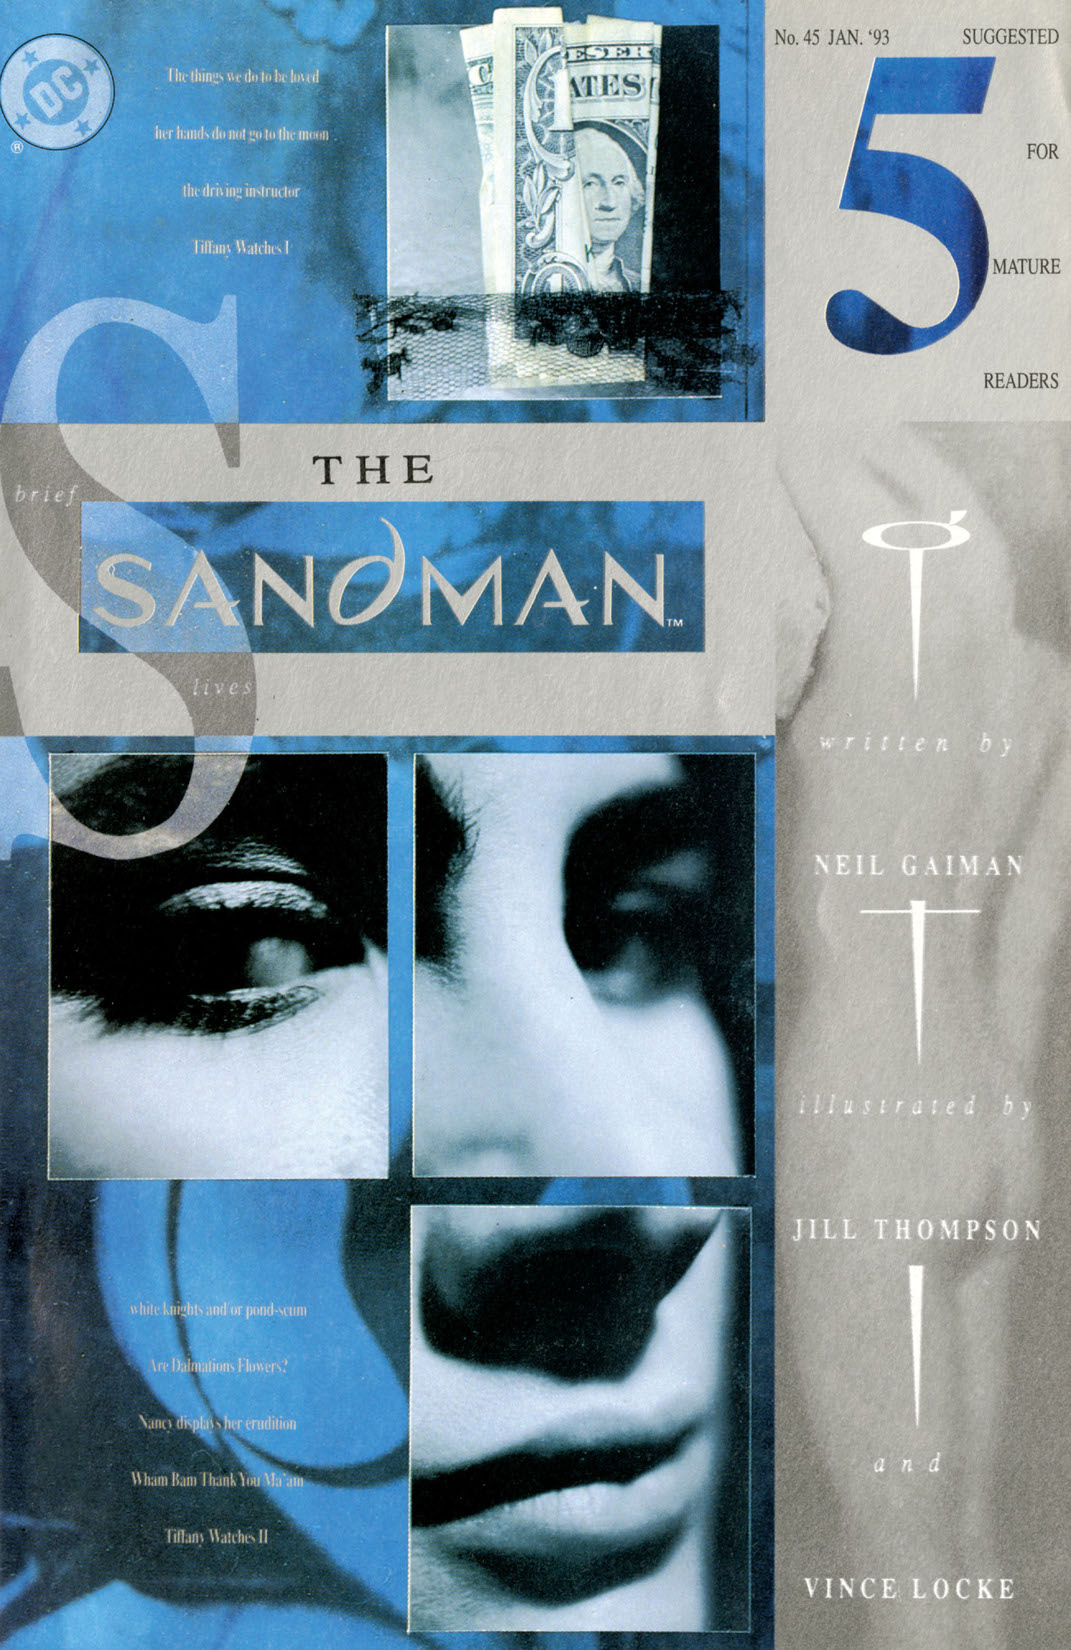 The Sandman #45 preview images